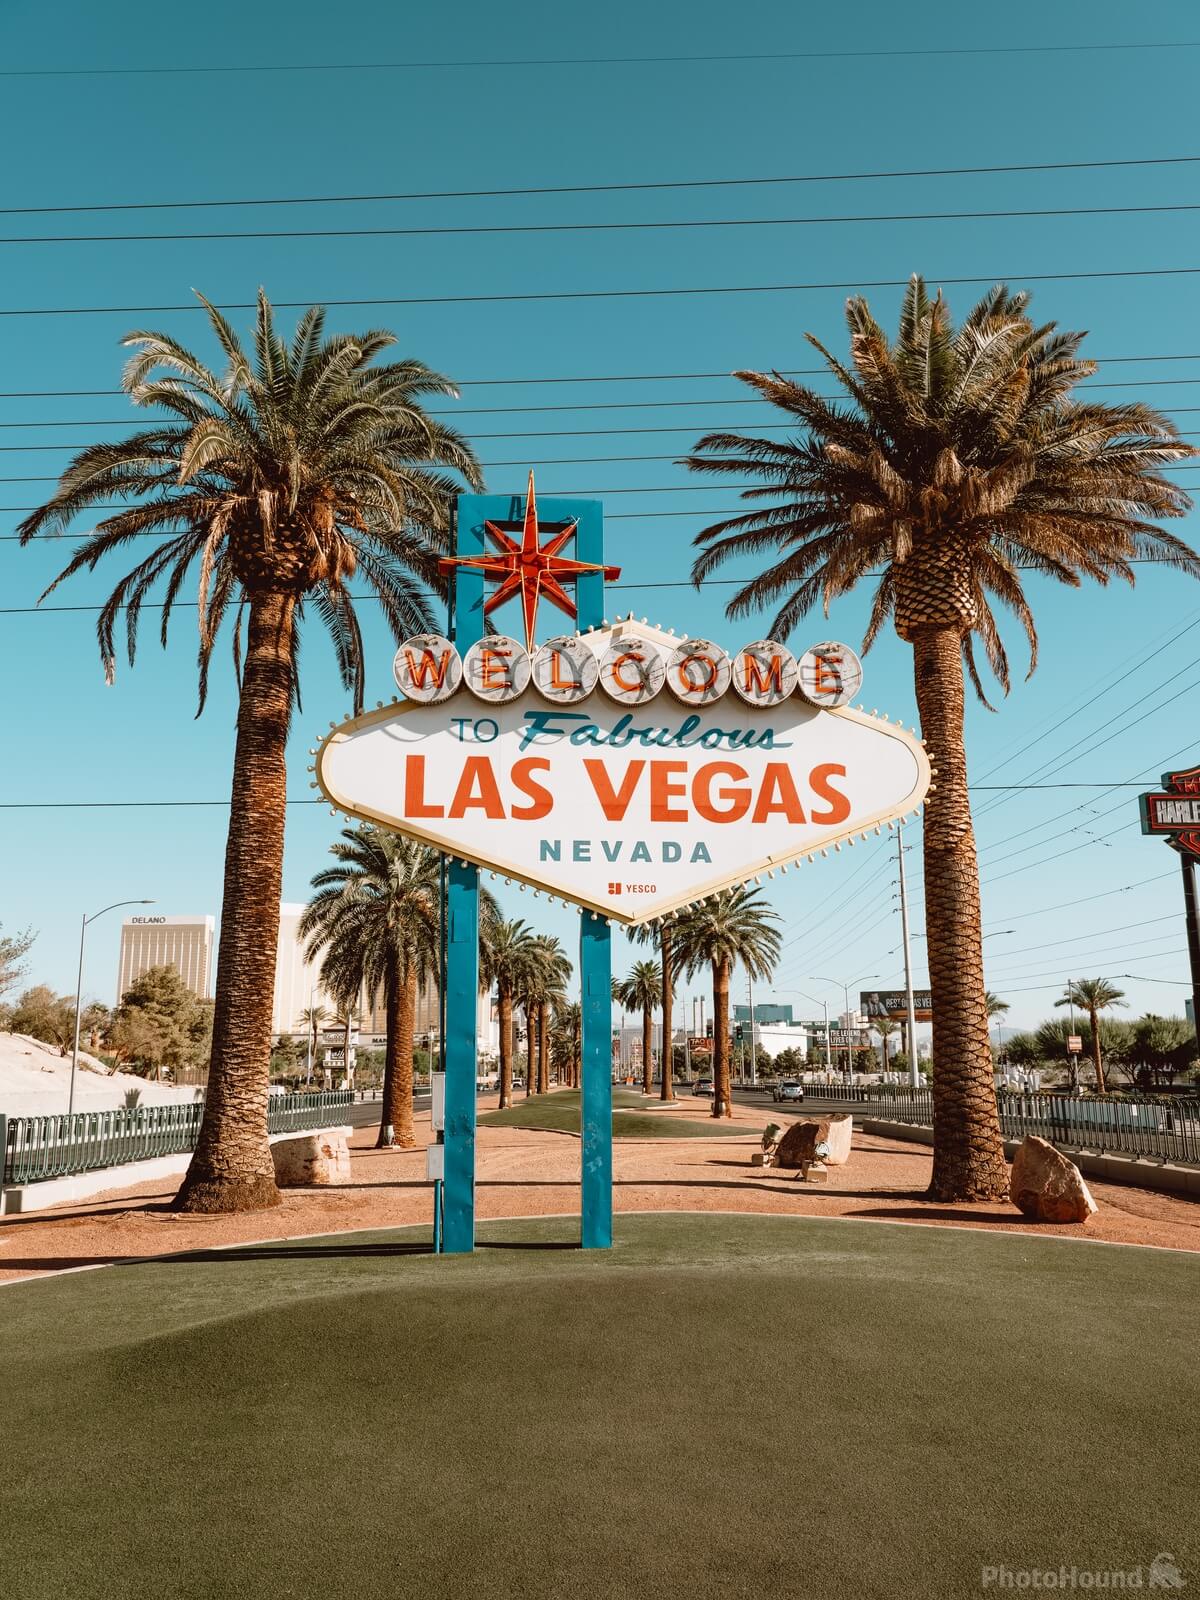 Image of Welcome To Fabulous Las Vegas by Team PhotoHound